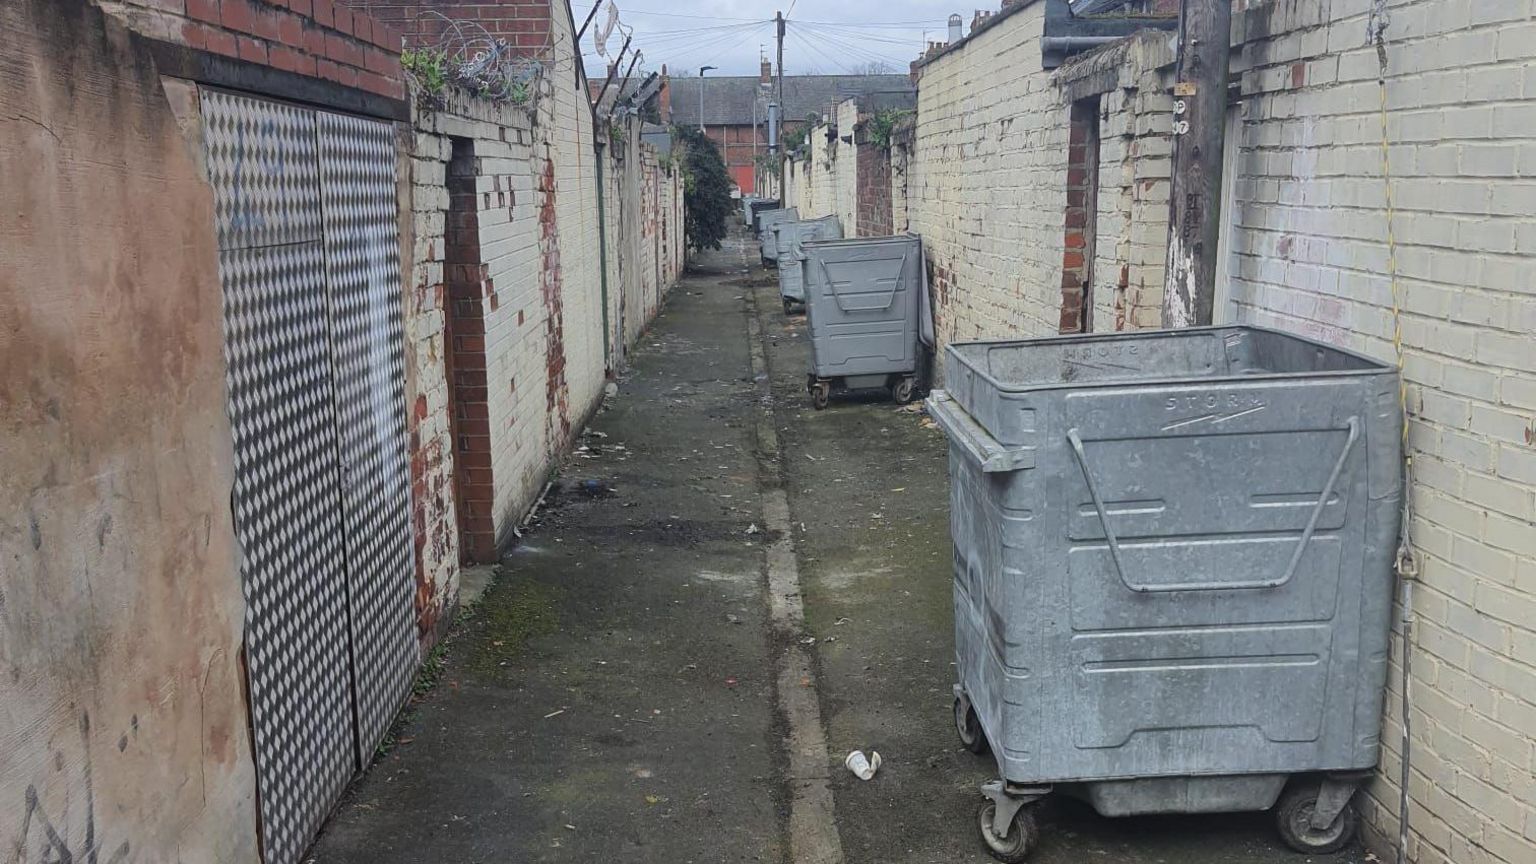 A cleared back alley in Middlesbrough